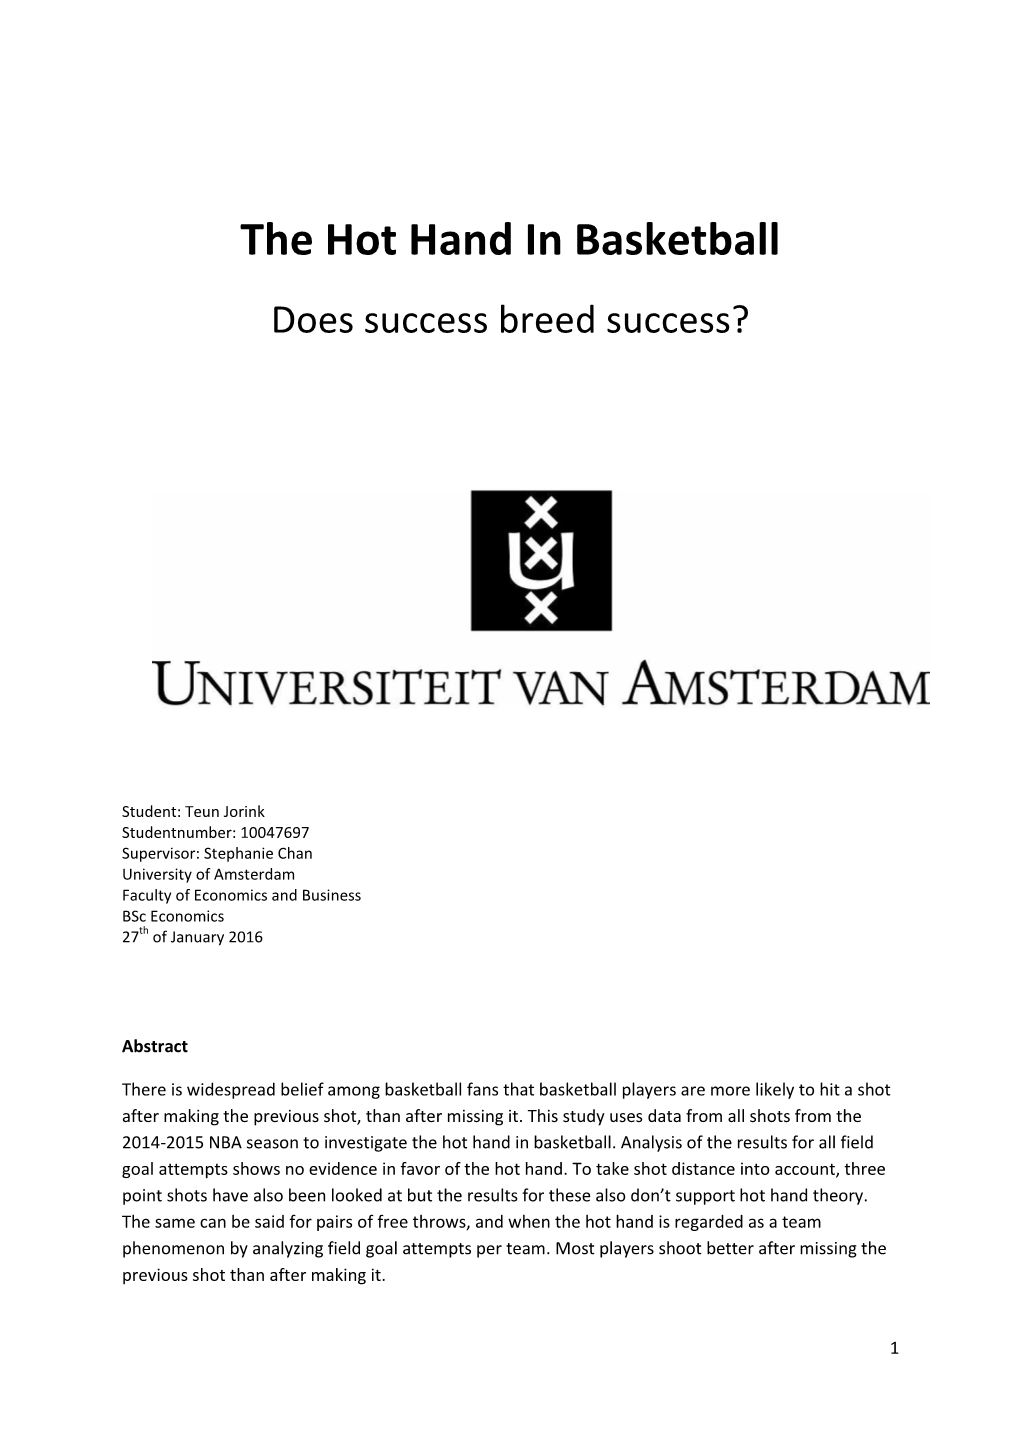 The Hot Hand in Basketball Does Success Breed Success?